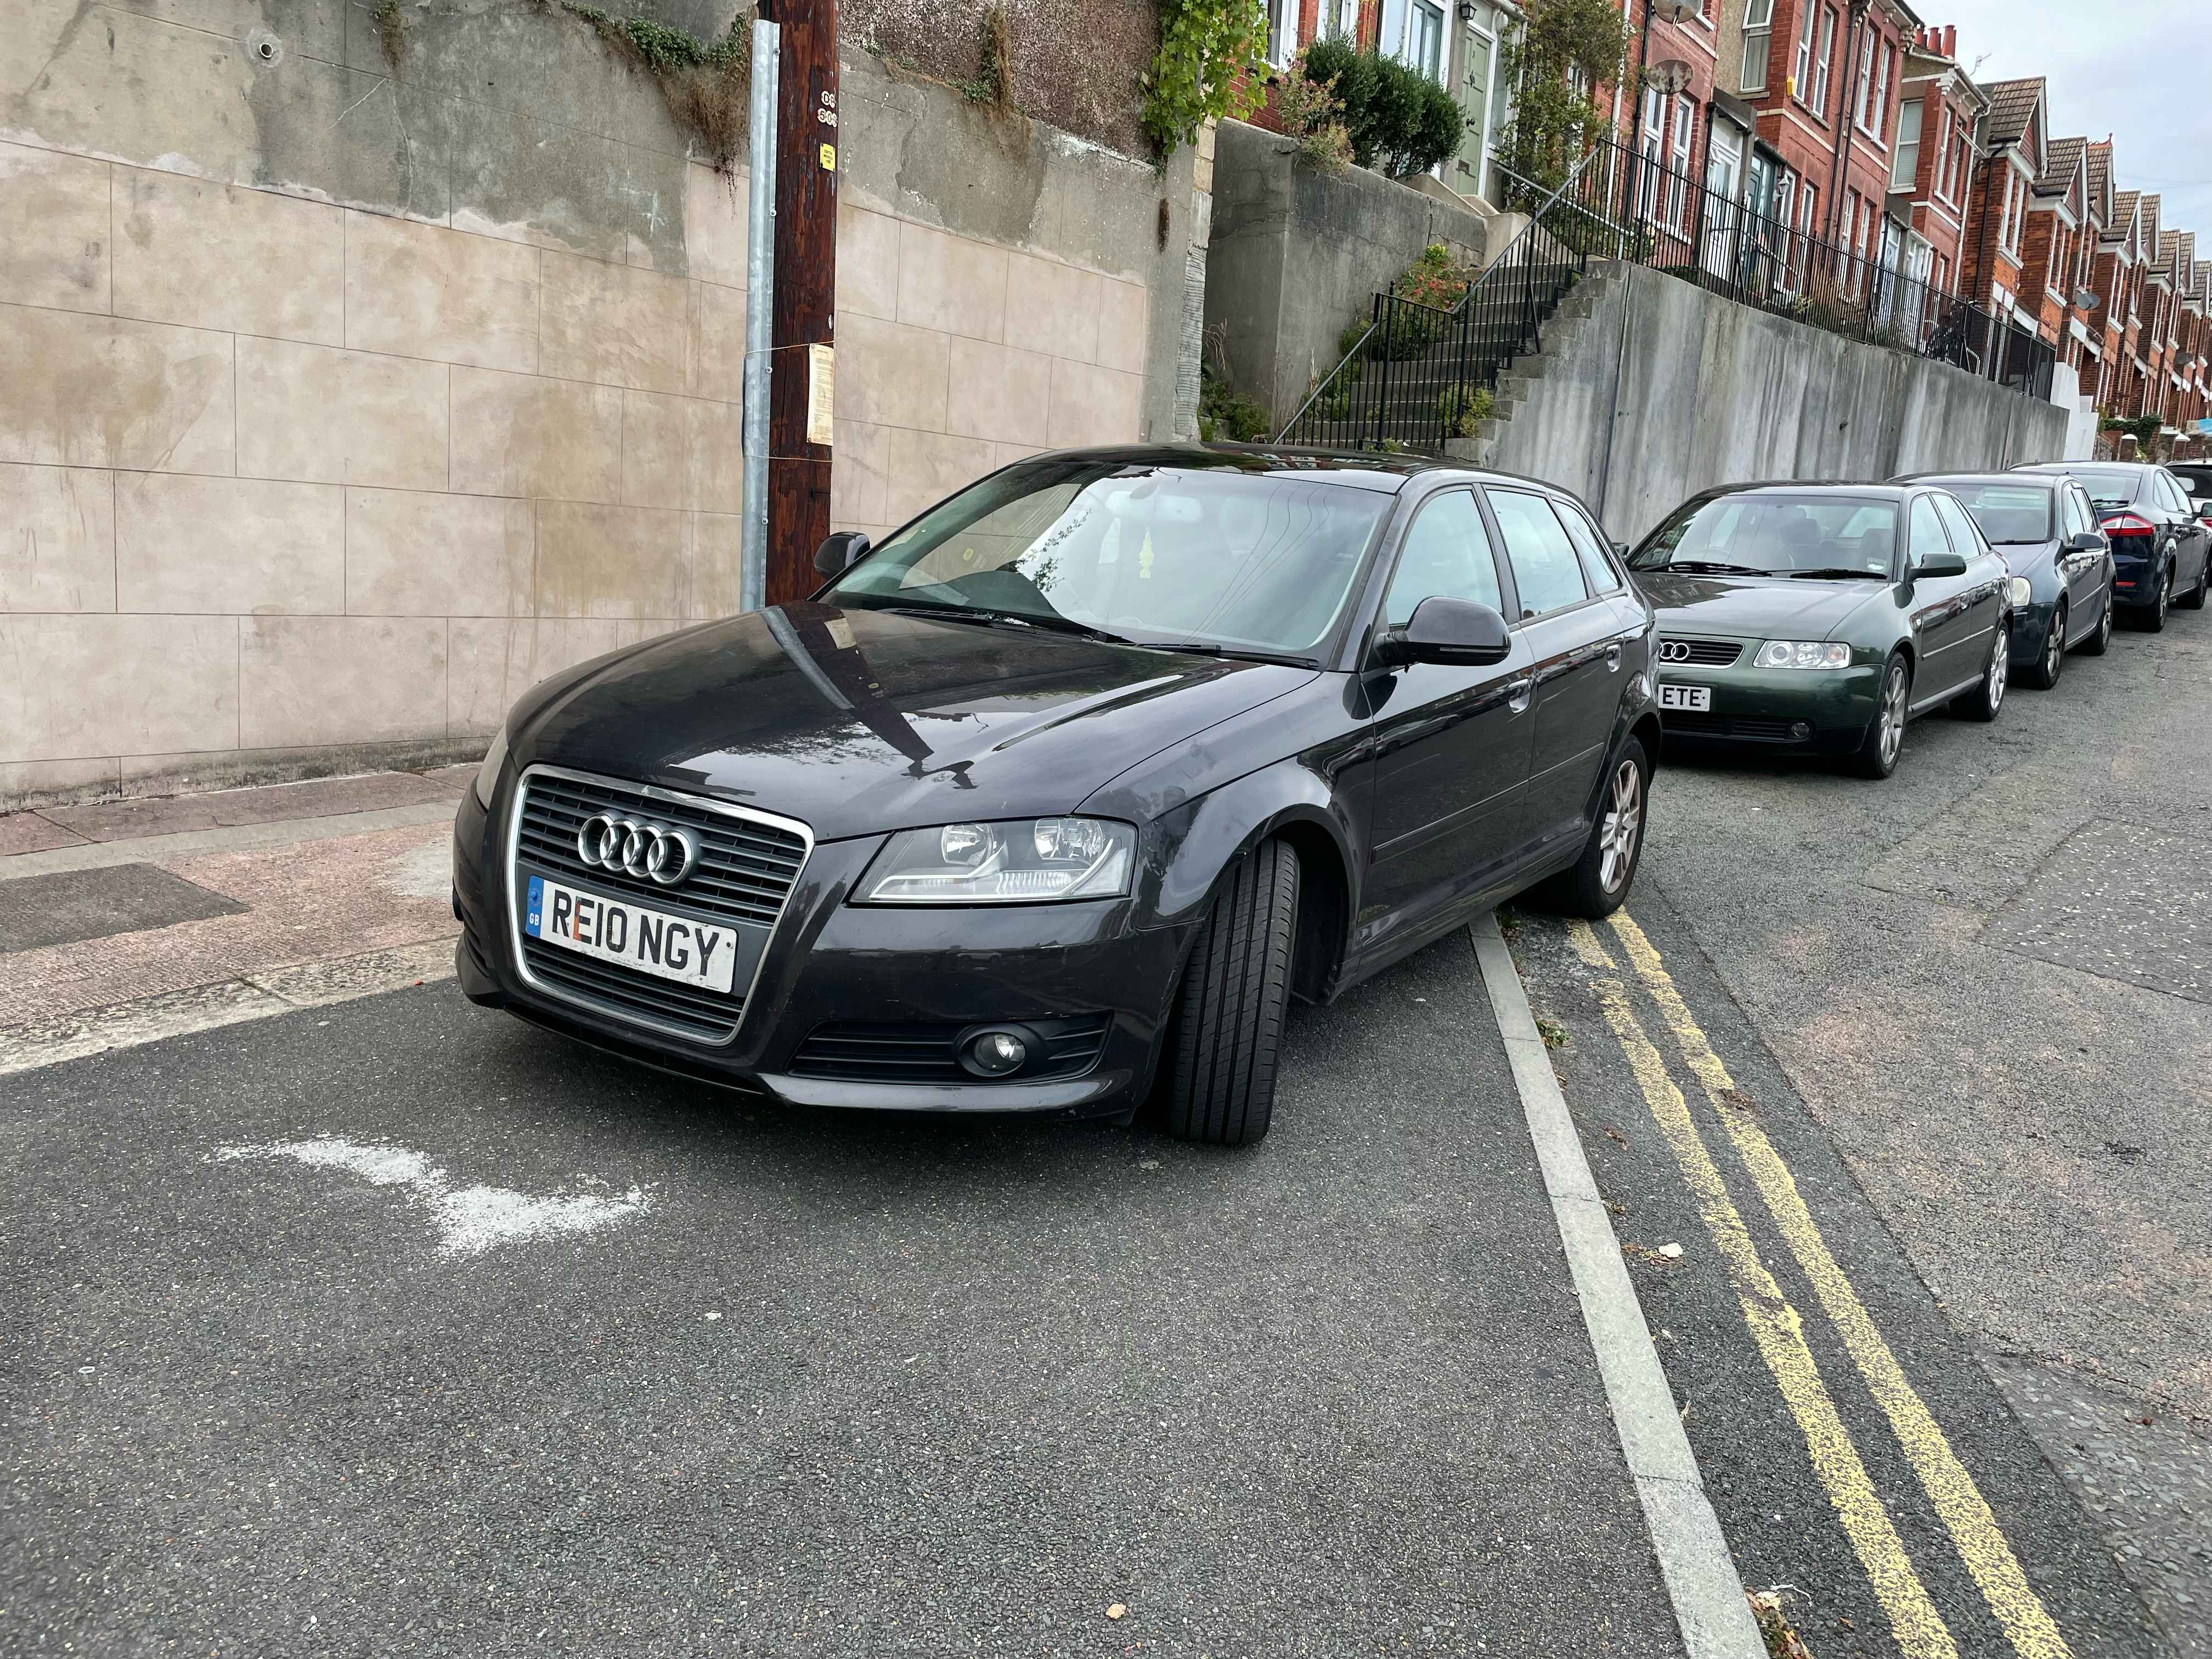 Photograph of RE10 NGY - a Black Audi A3 parked in Hollingdean by a non-resident who uses the local area as part of their Brighton commute. The second of three photographs supplied by the residents of Hollingdean.